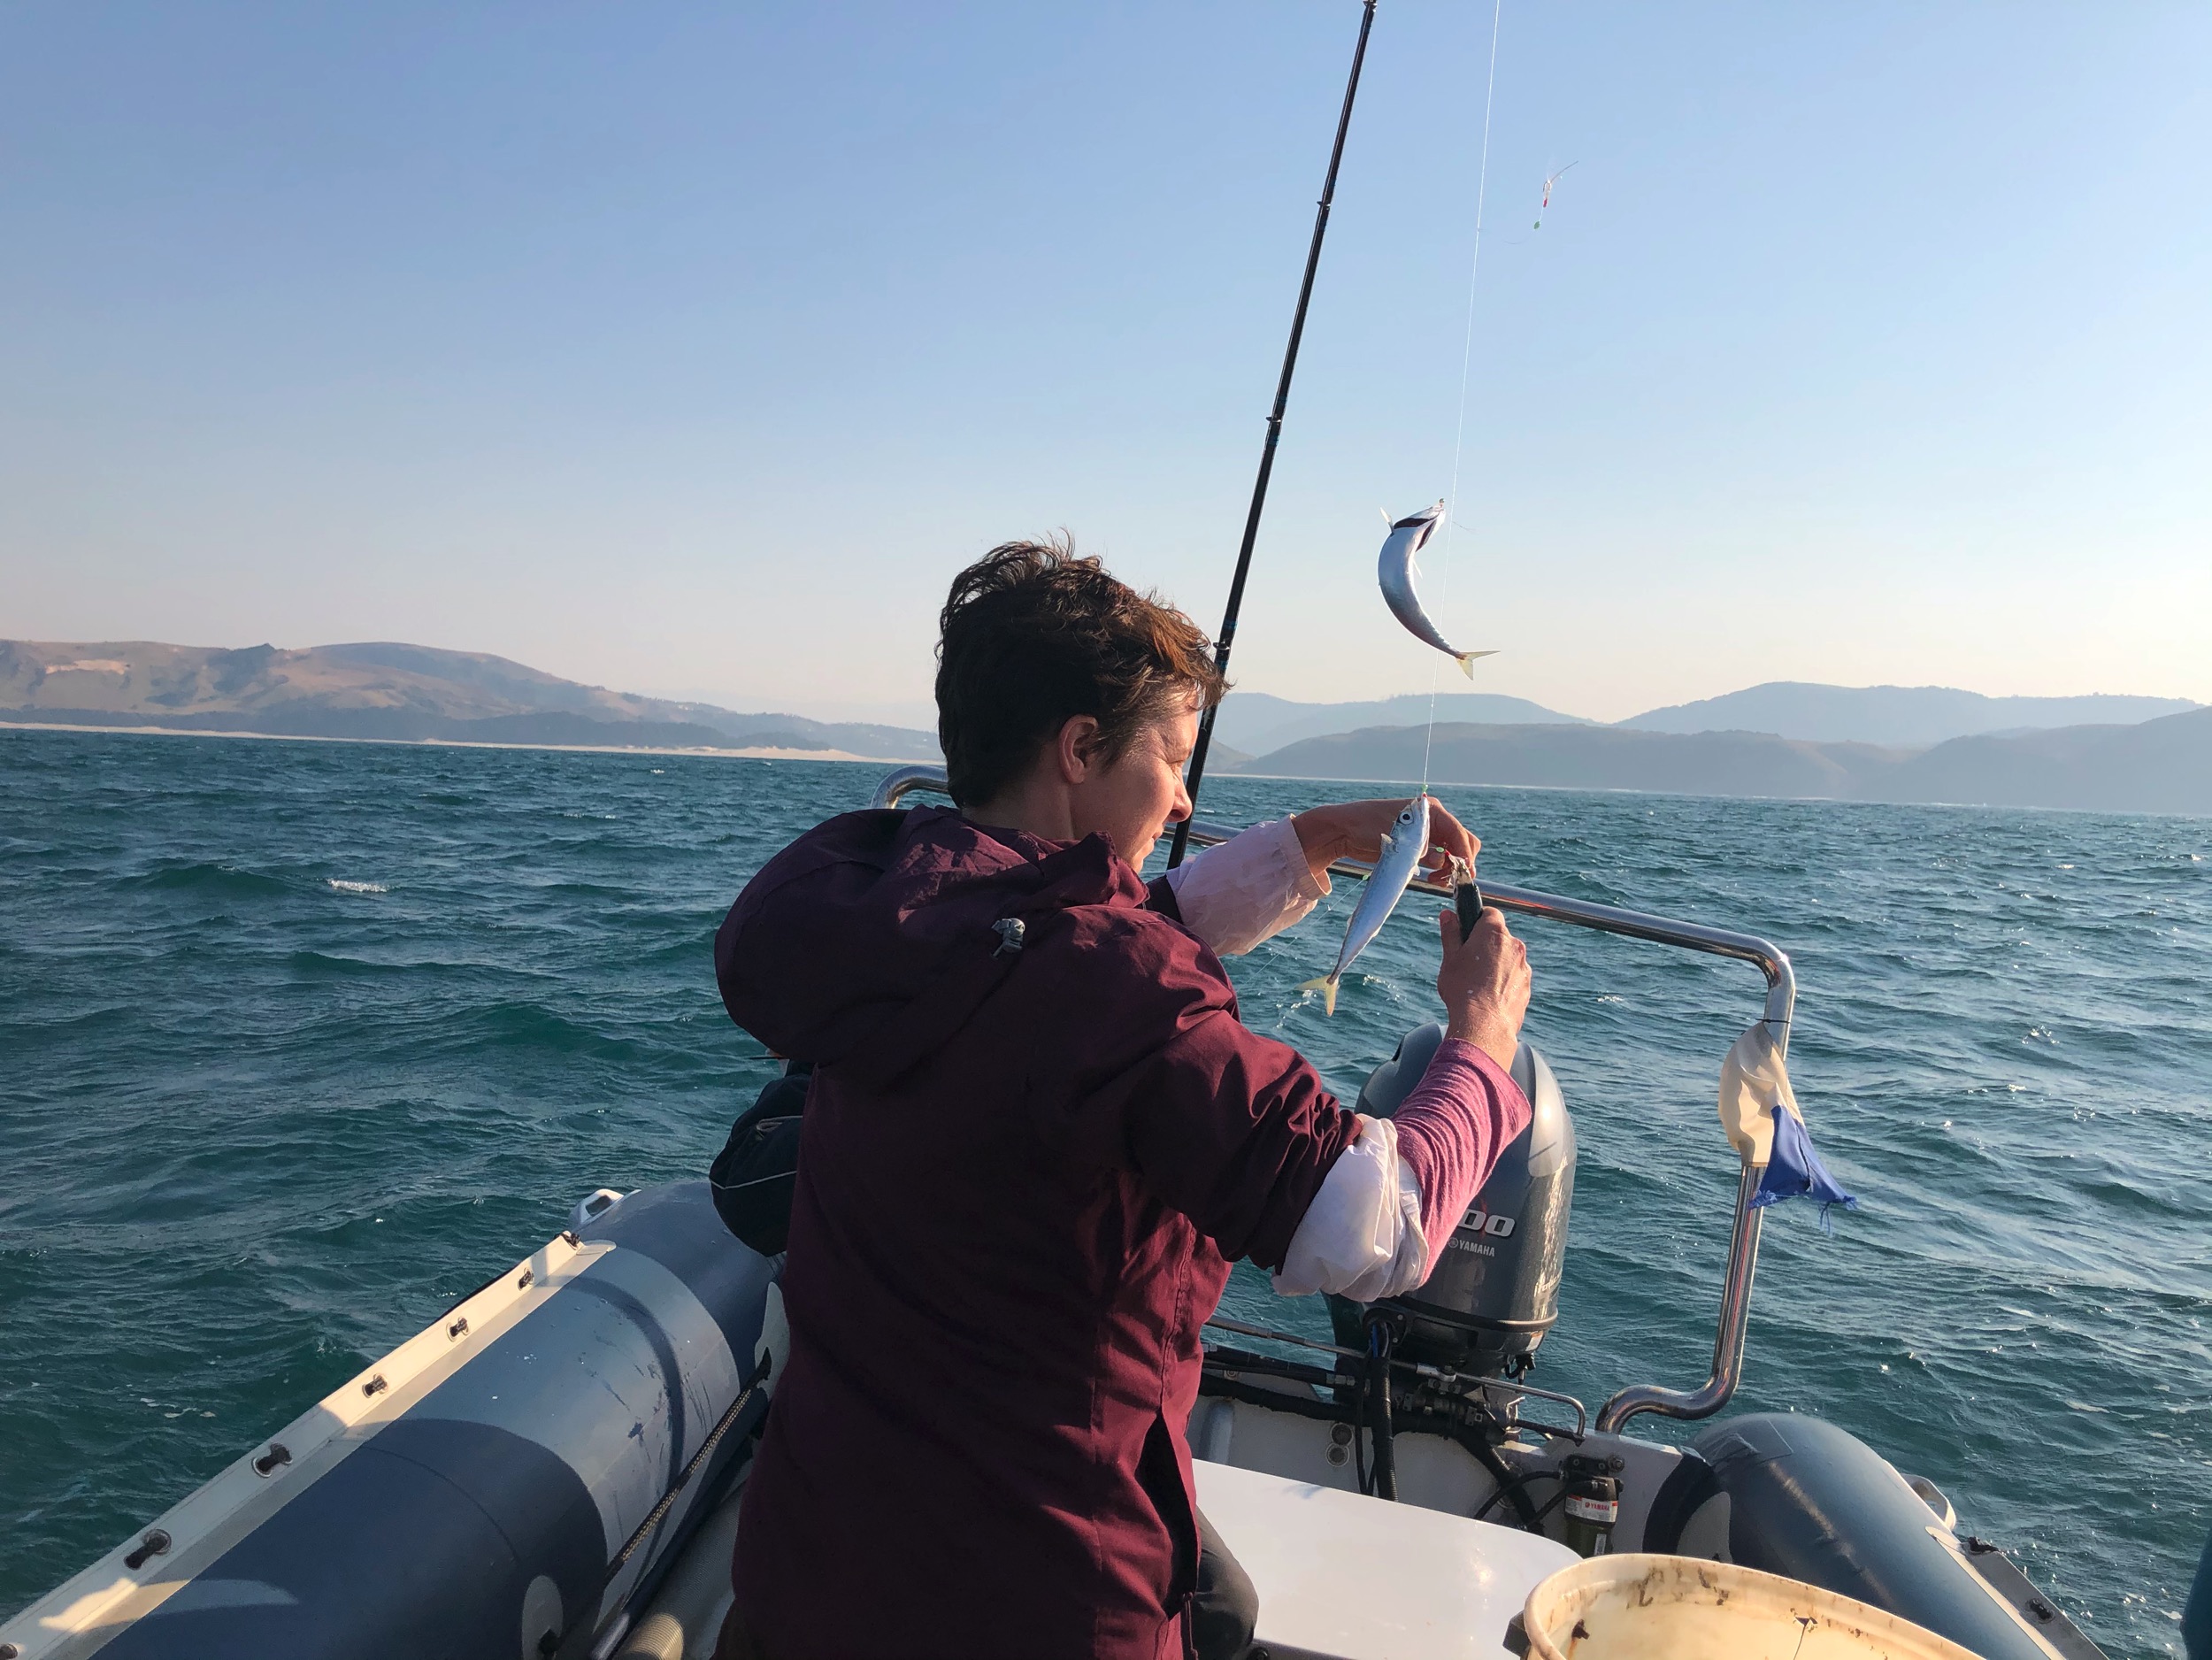 We even made ourselves useful, taking off the live mackeral, to be used as bait-fish